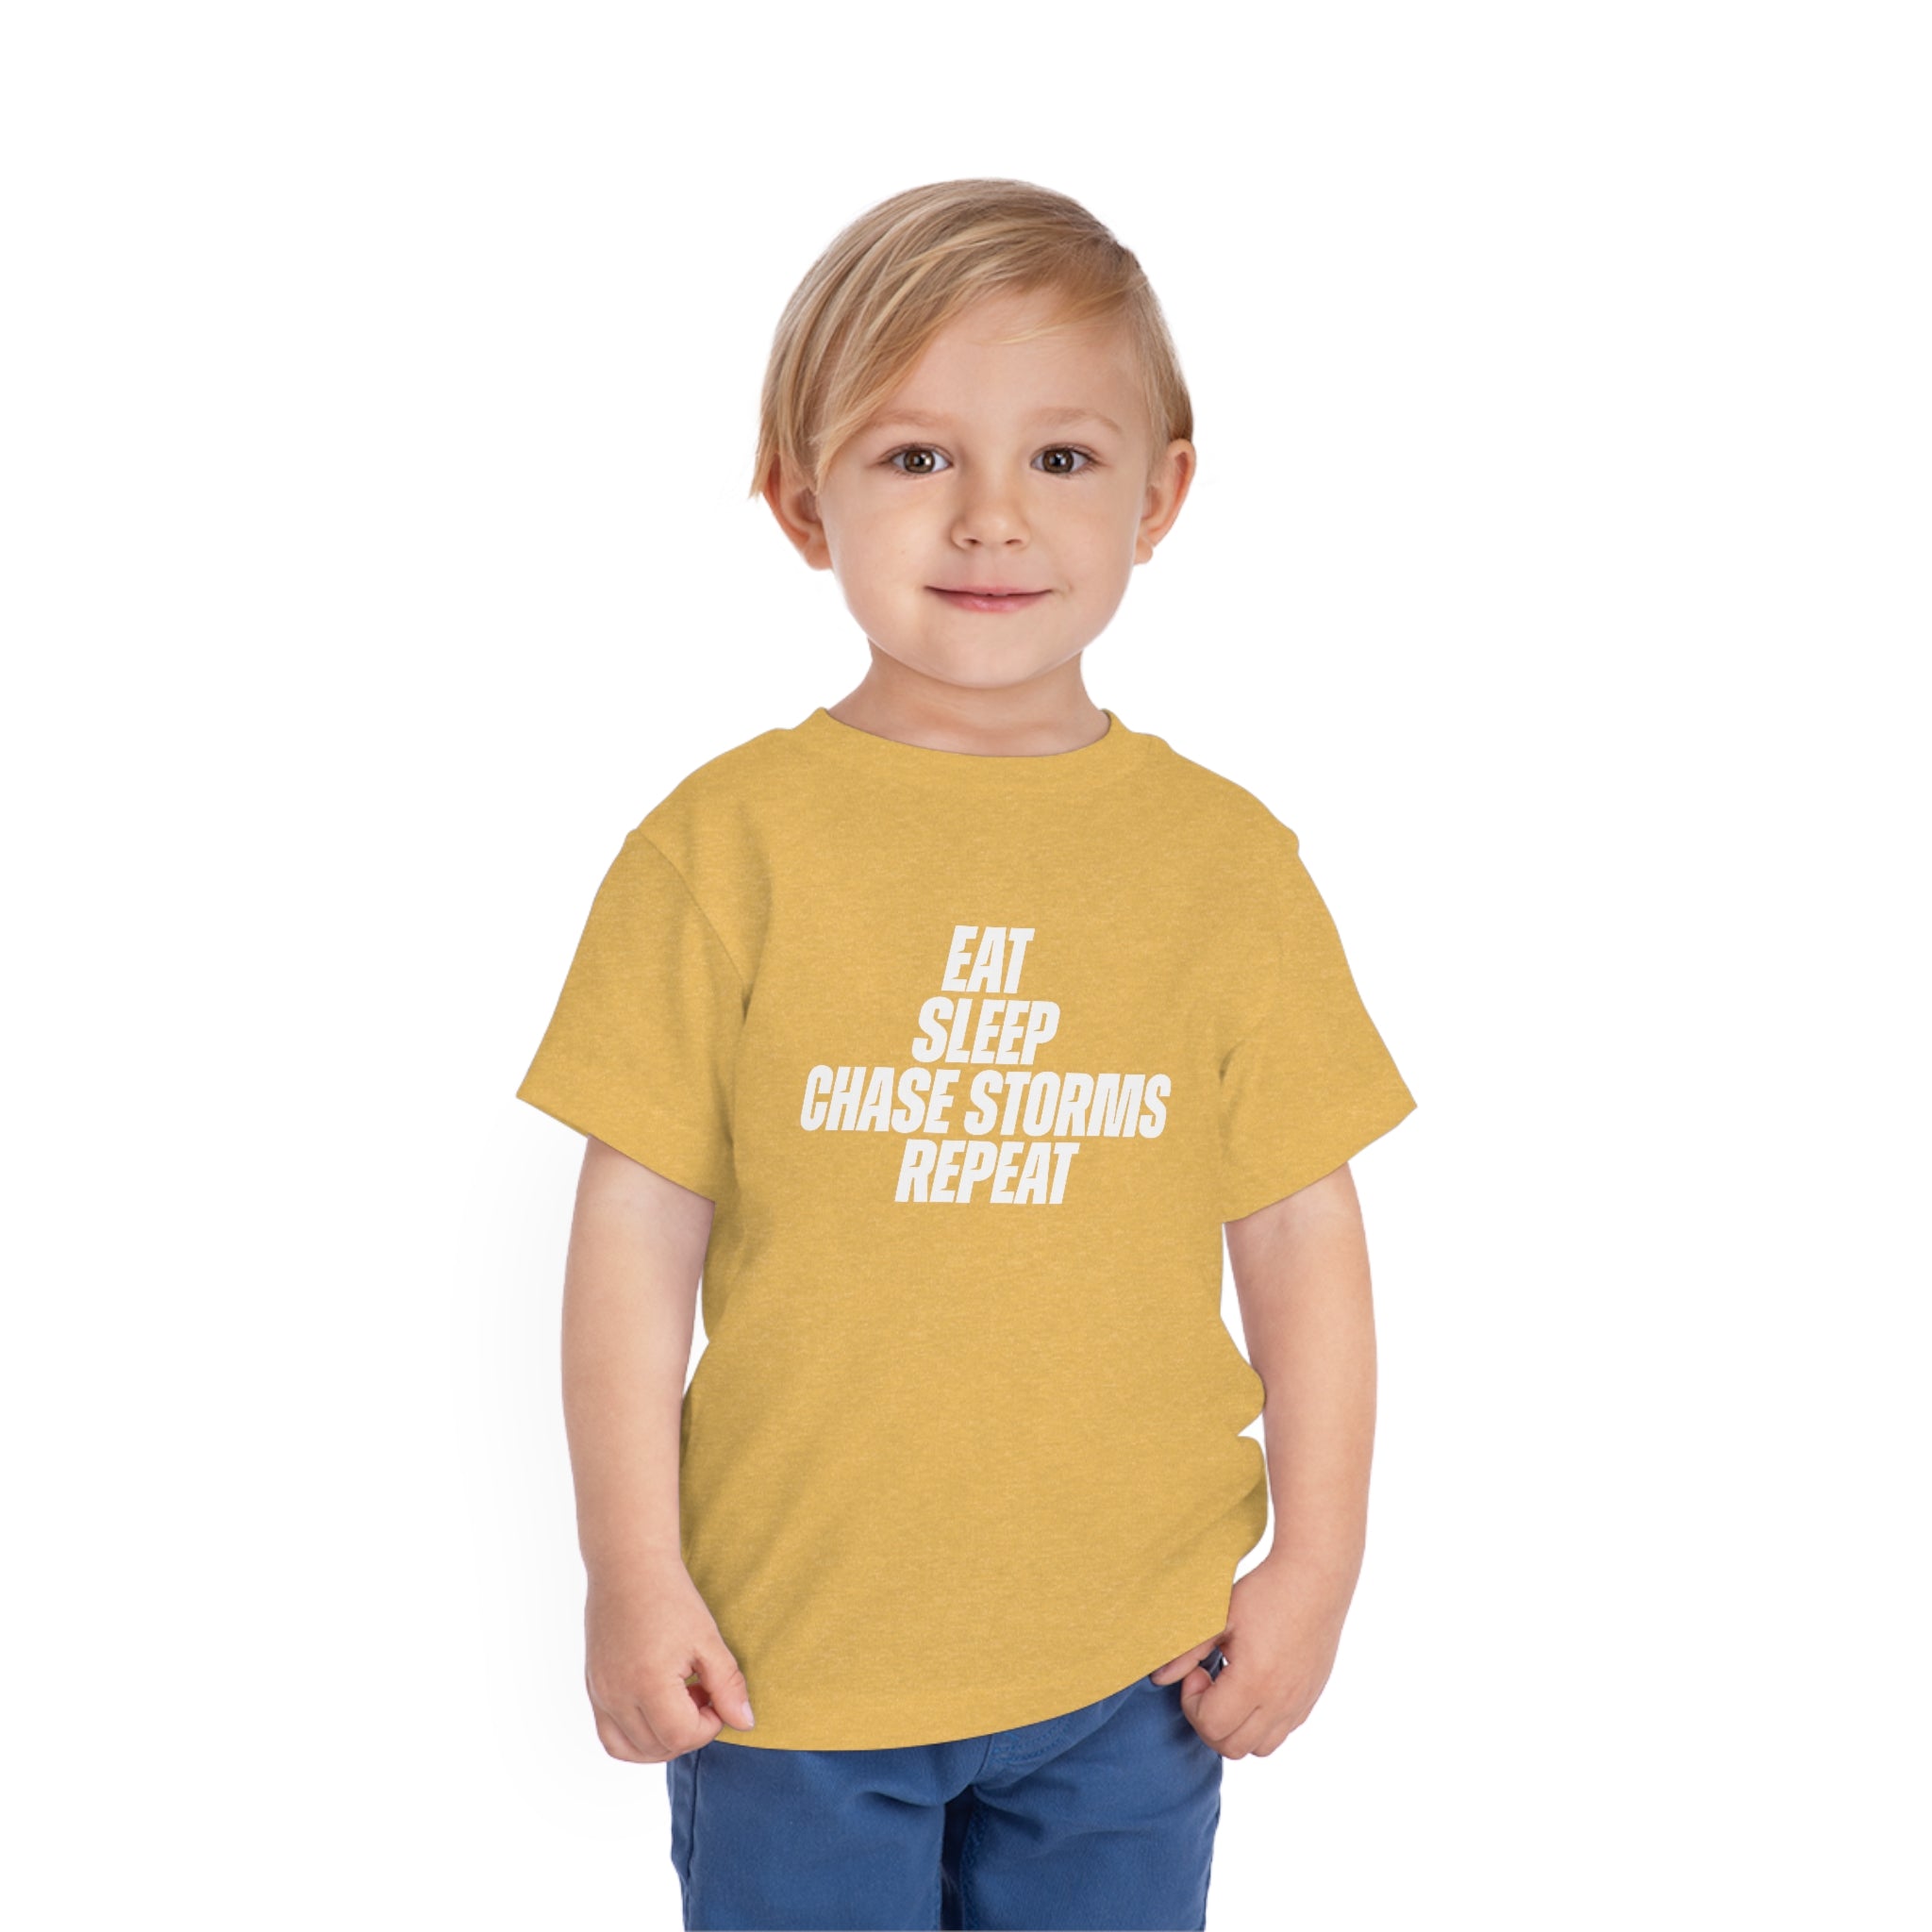 Eat, Sleep, Chase Storms, Repeat Toddler Tee 